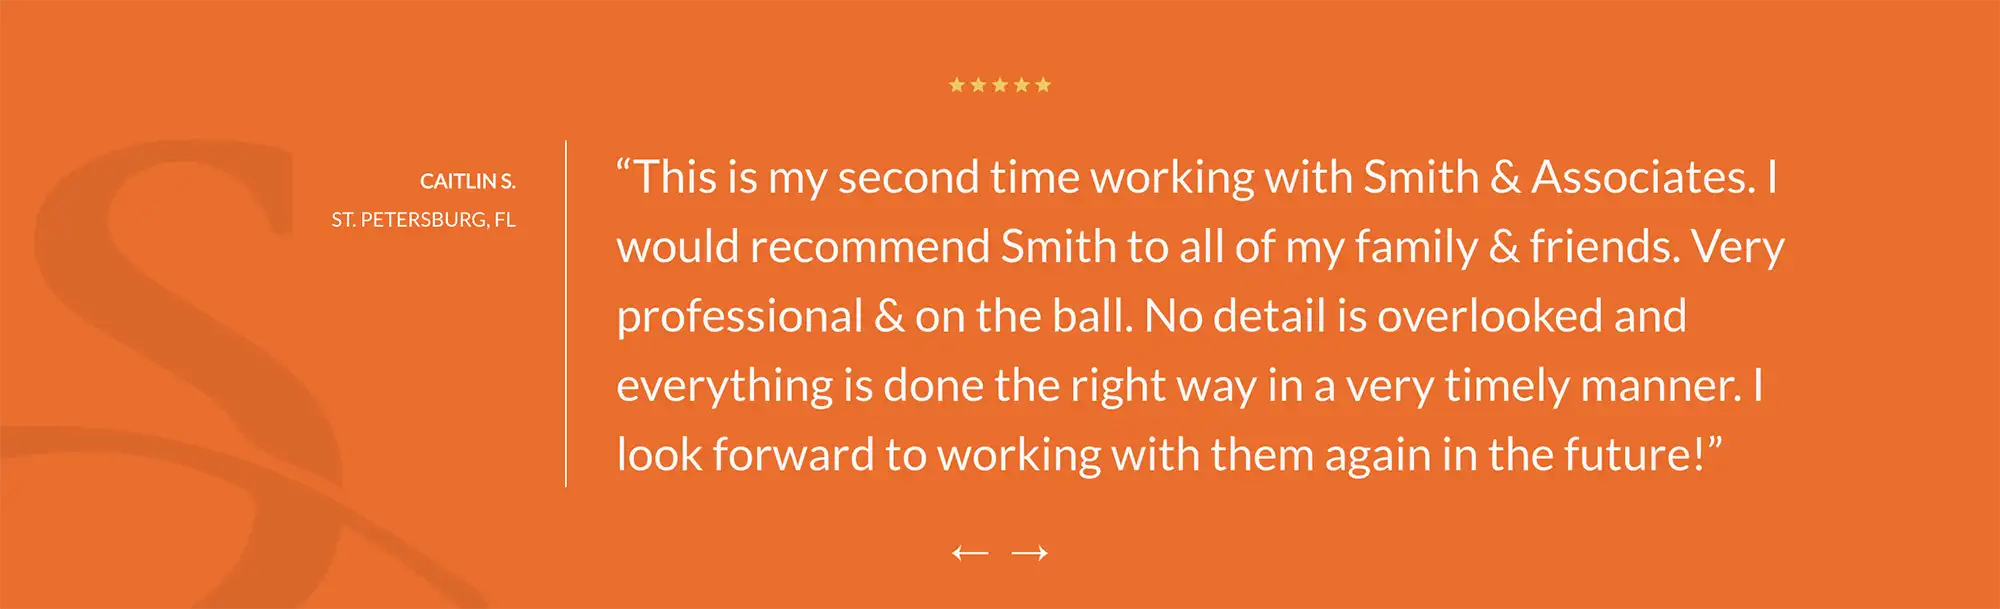 A testimonial for Smith & Associates in St. Petersburg, FL.